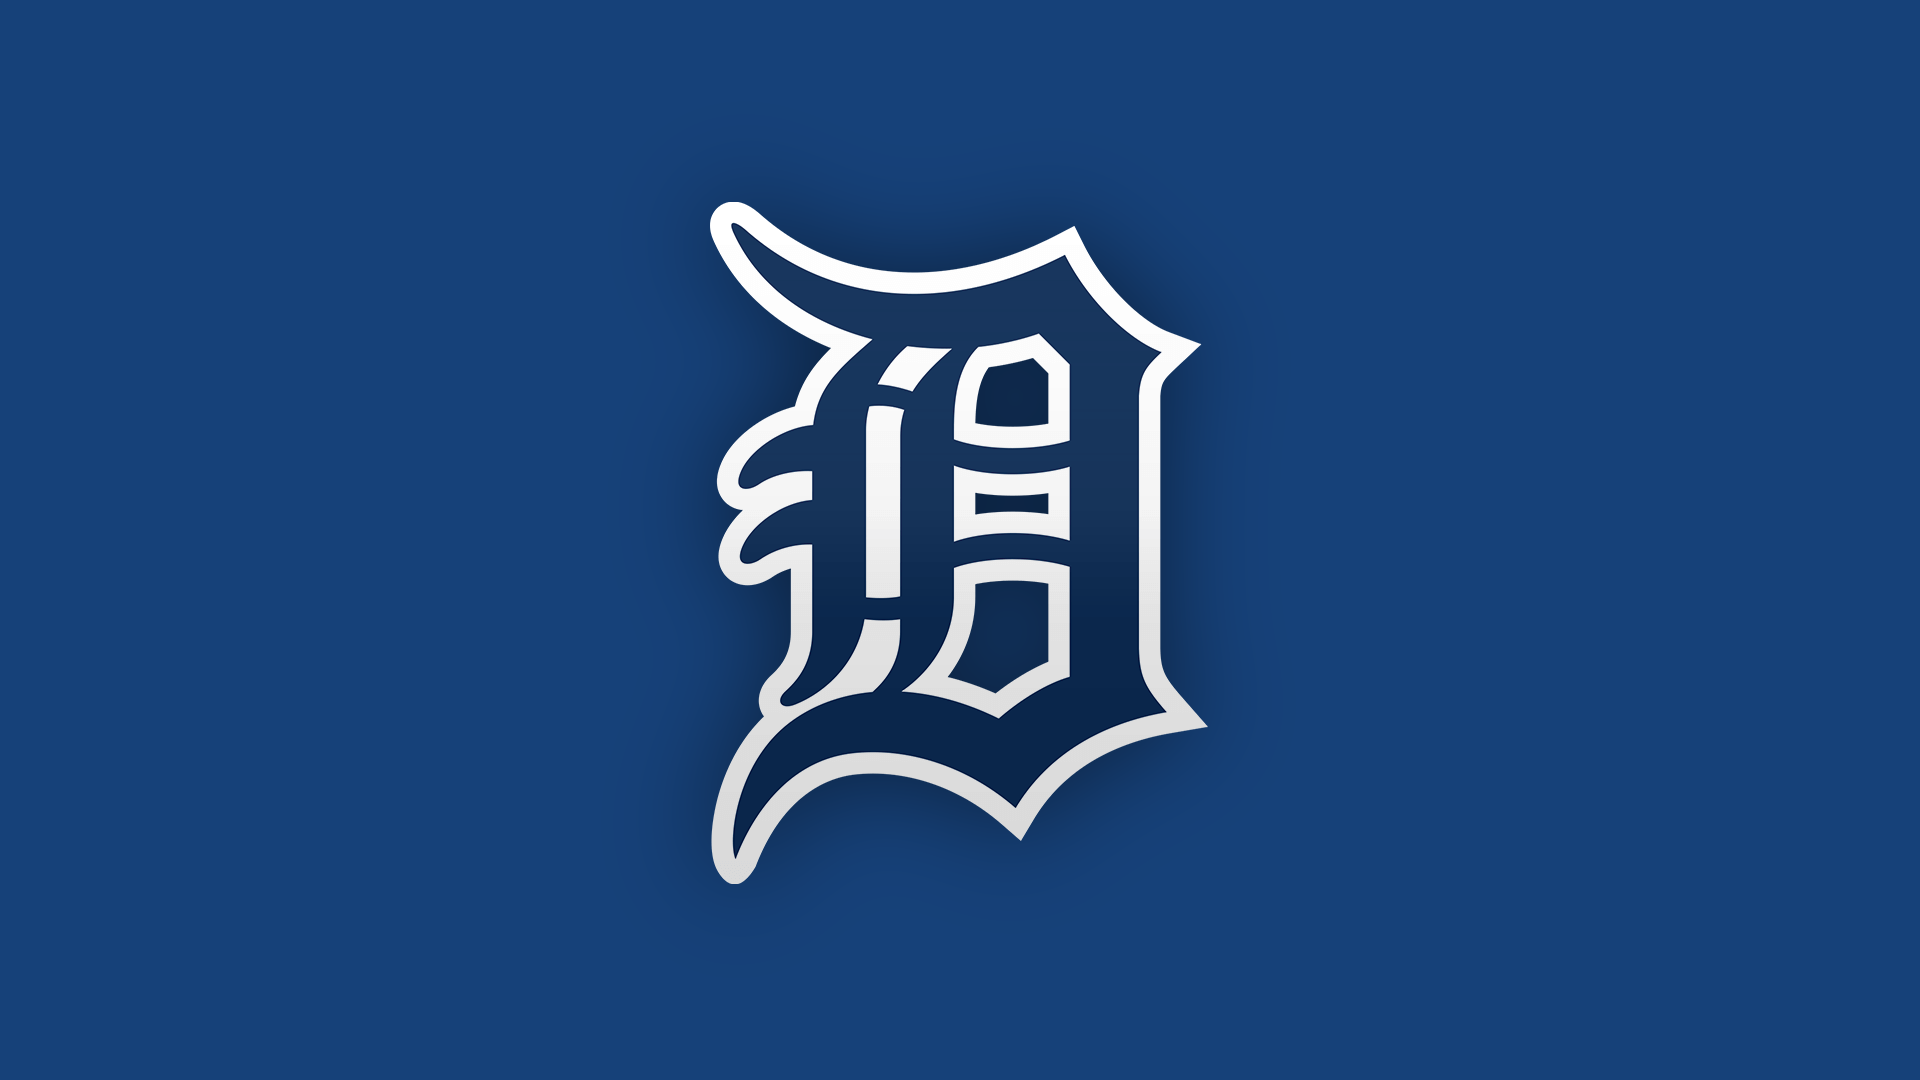 MLB - Sunday brunchball! Watch the Detroit Tigers take on